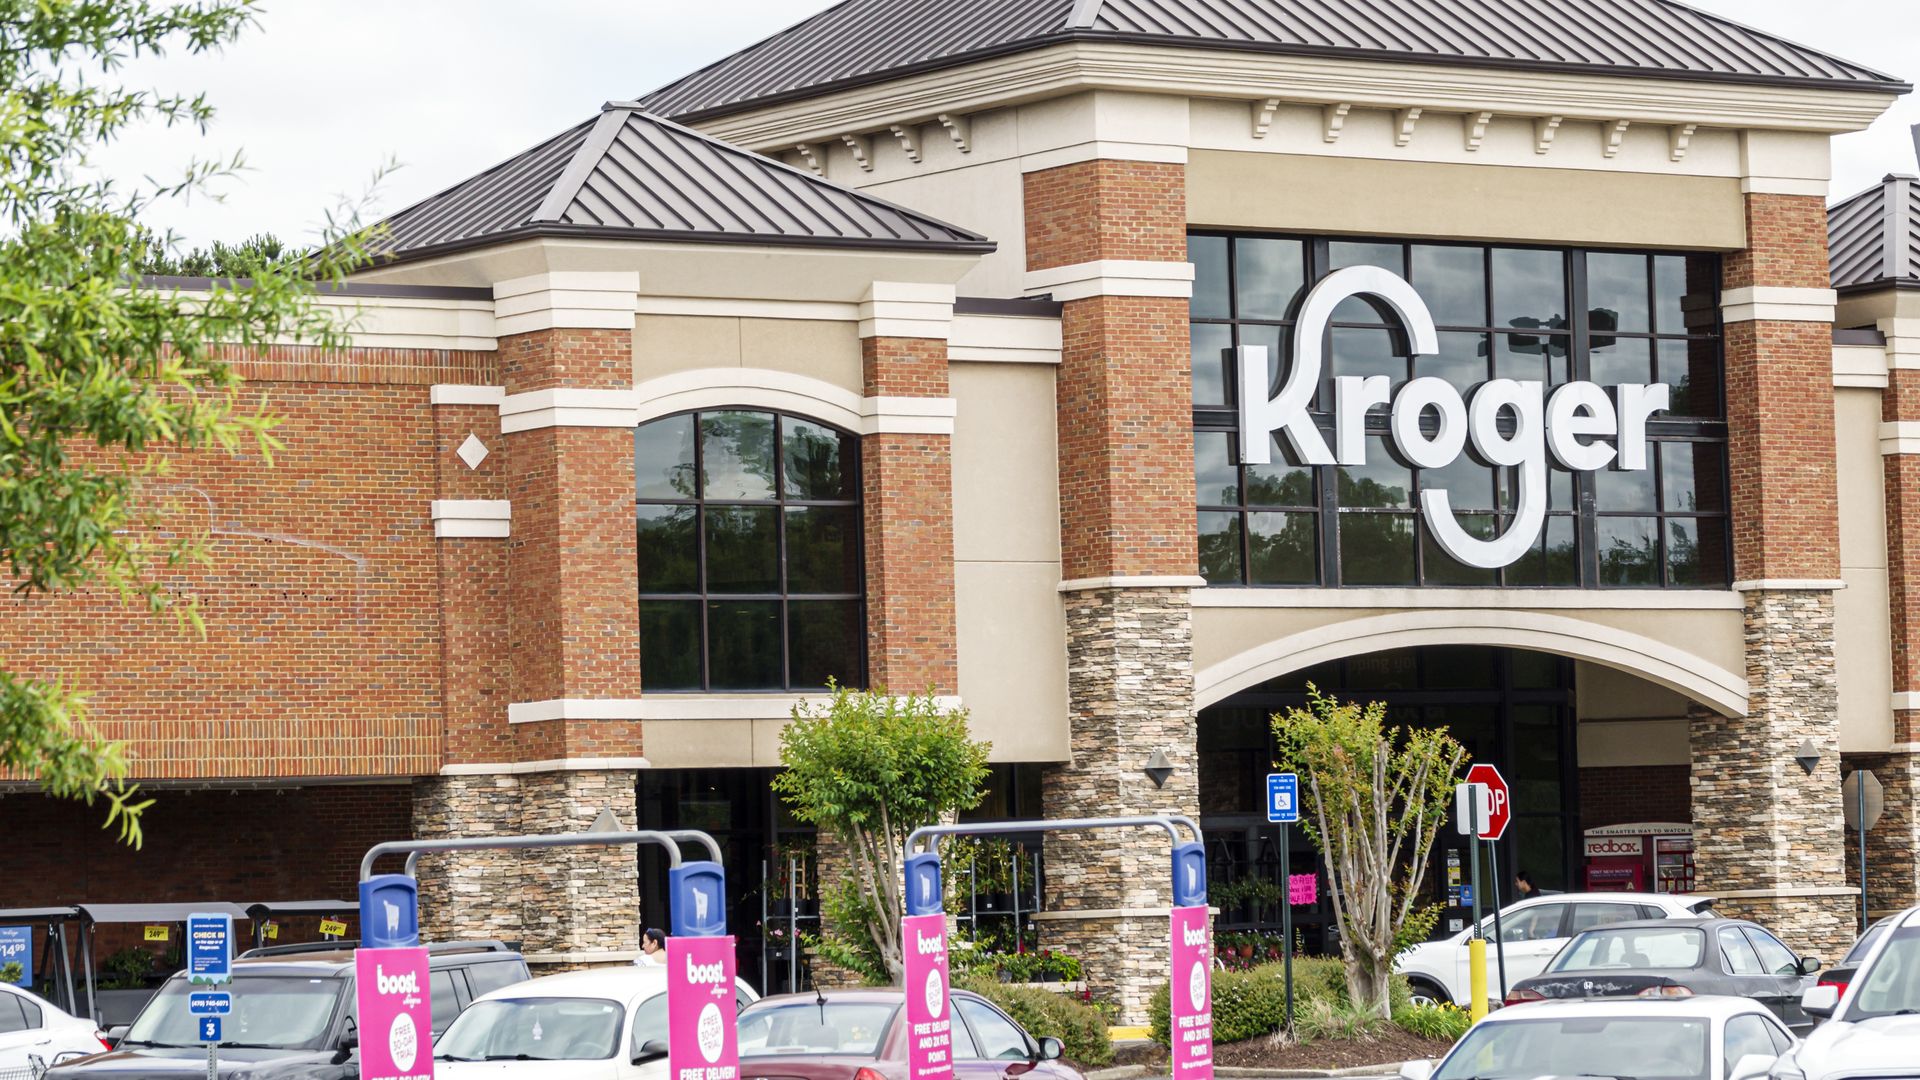 Customers enter a Kroger grocery store, which has a brick and glass facade.